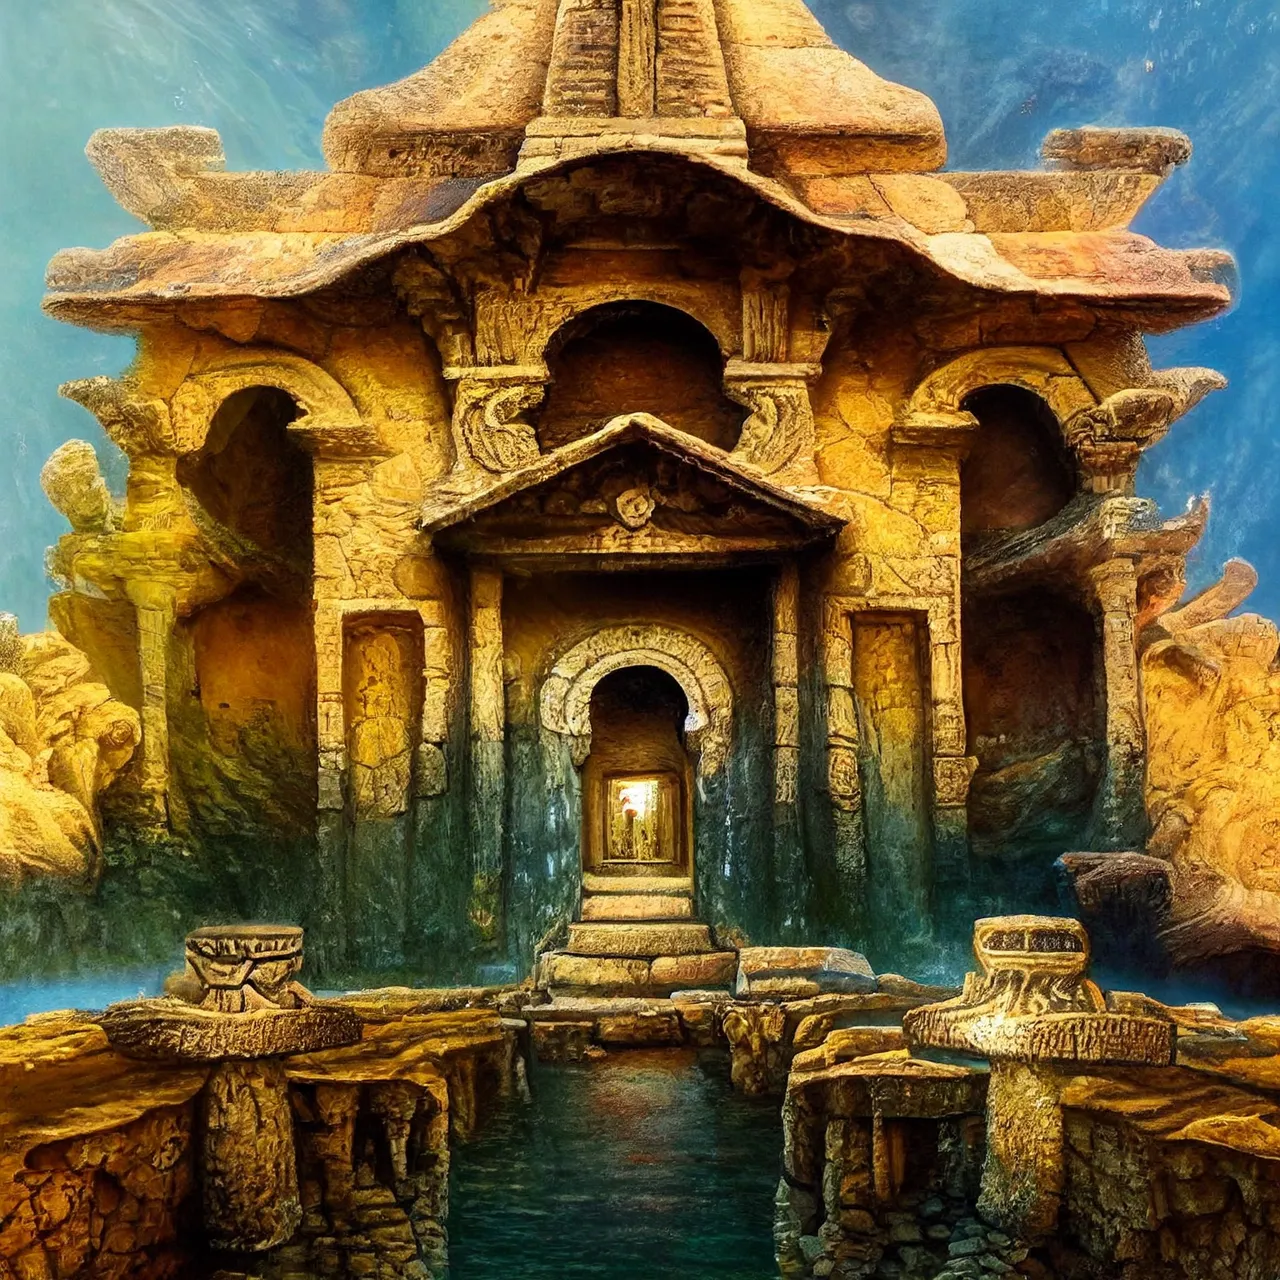 Ed_Privat_Ancient_temple_in_a_cliff_with_water_and_animals_drin_469c1485-5652-4299-91d9-5d016e3e35f8.png